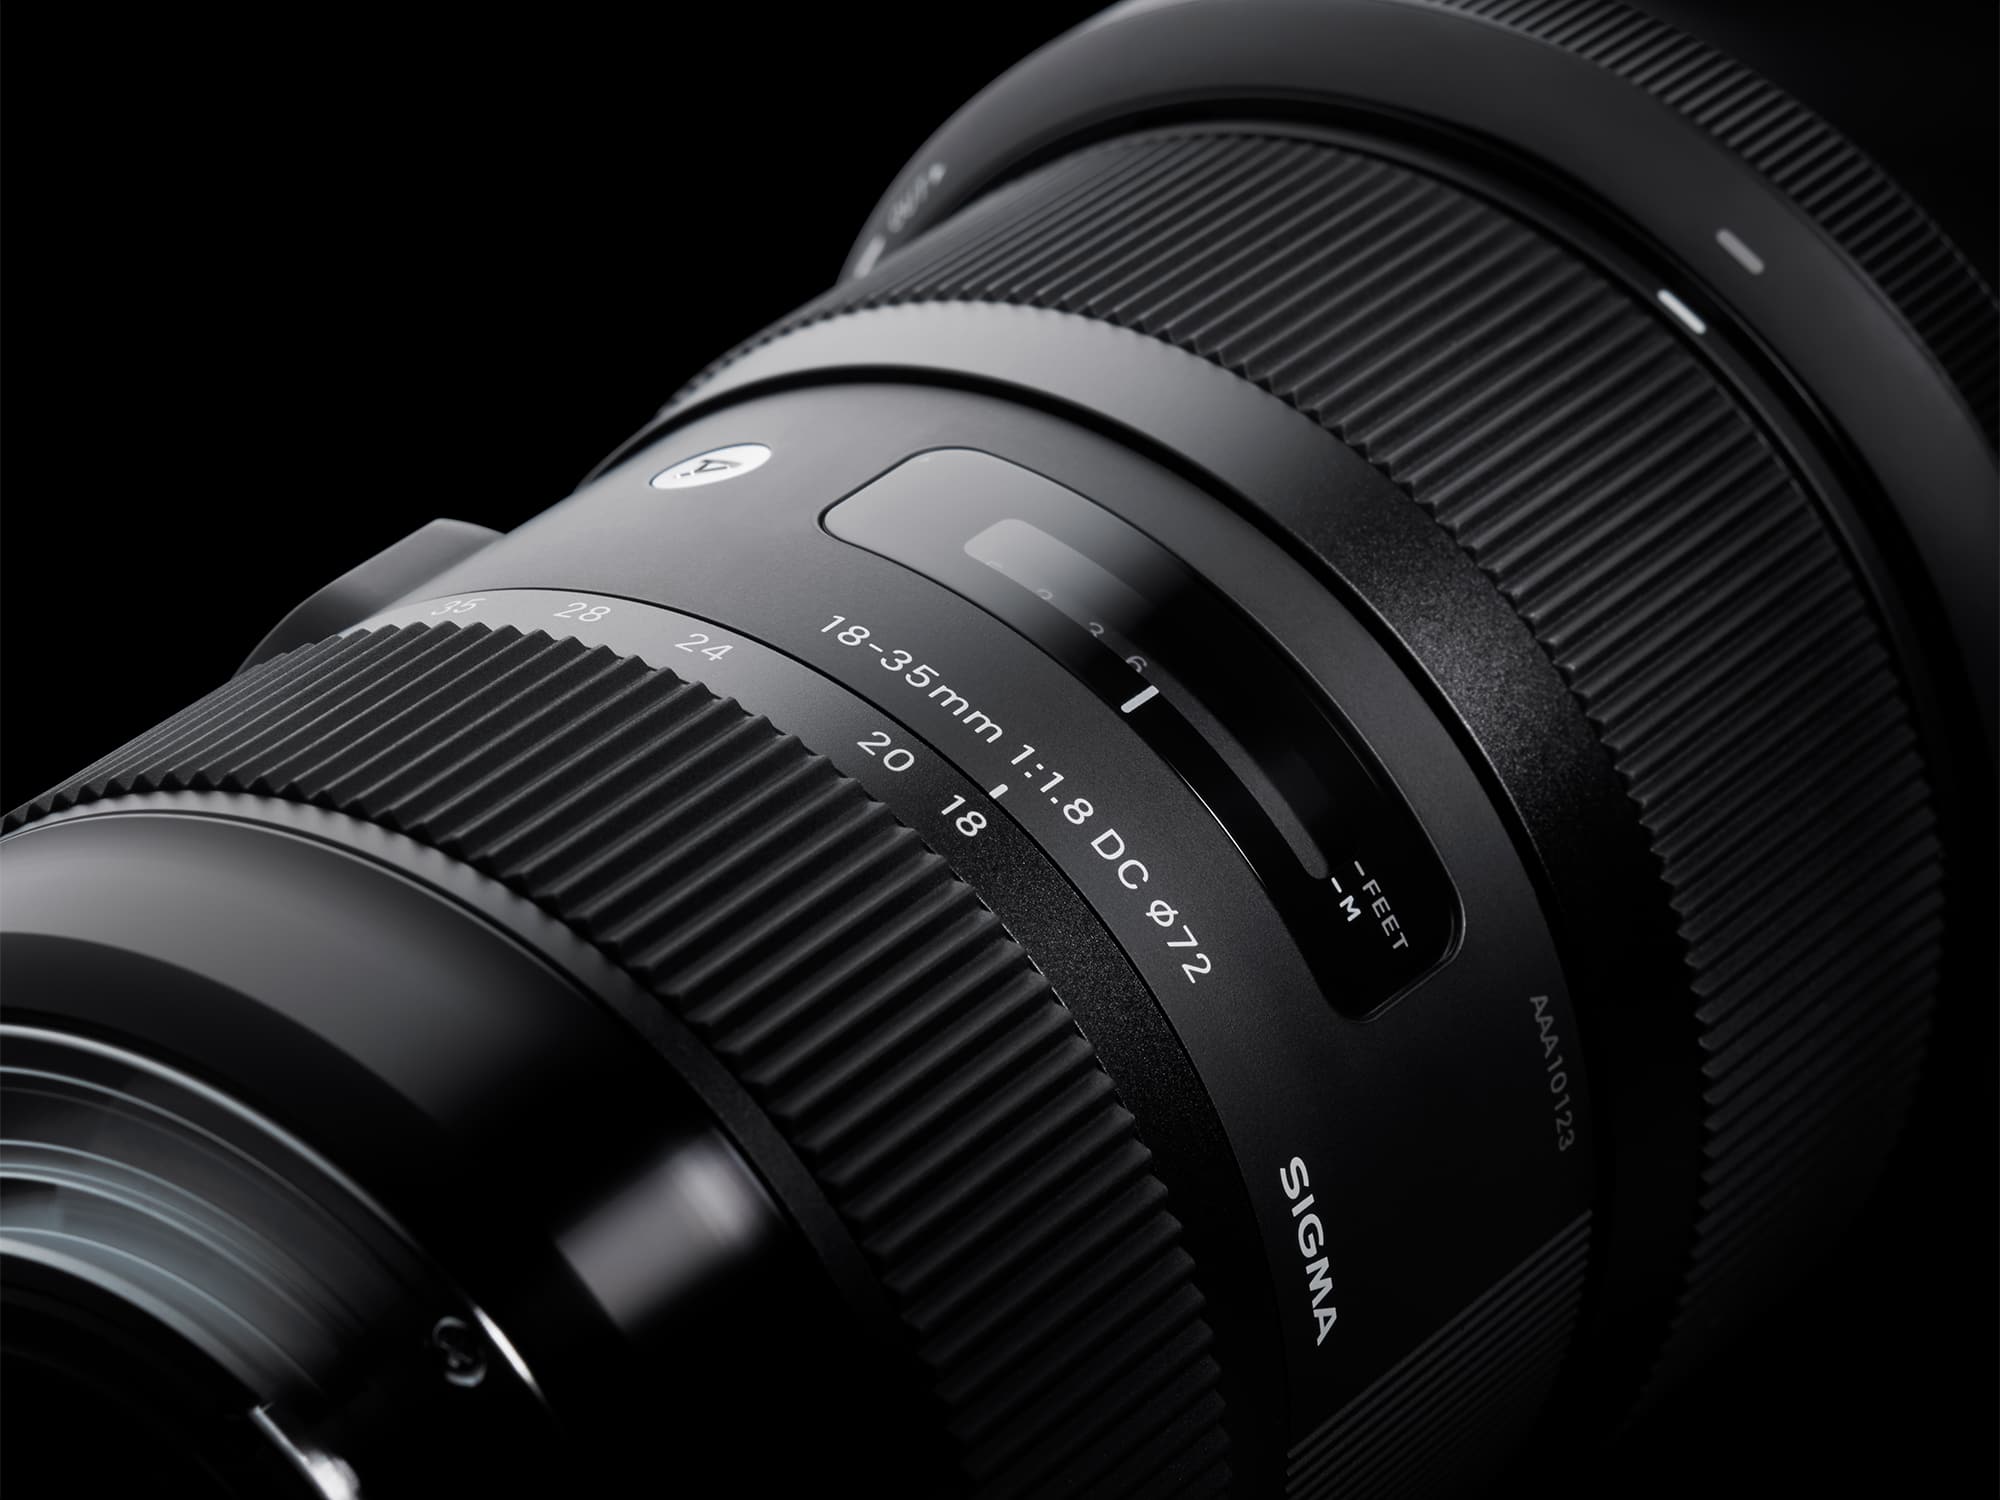 Sigma 18-35mm f1.8 DC HSM Canon Fit Lens